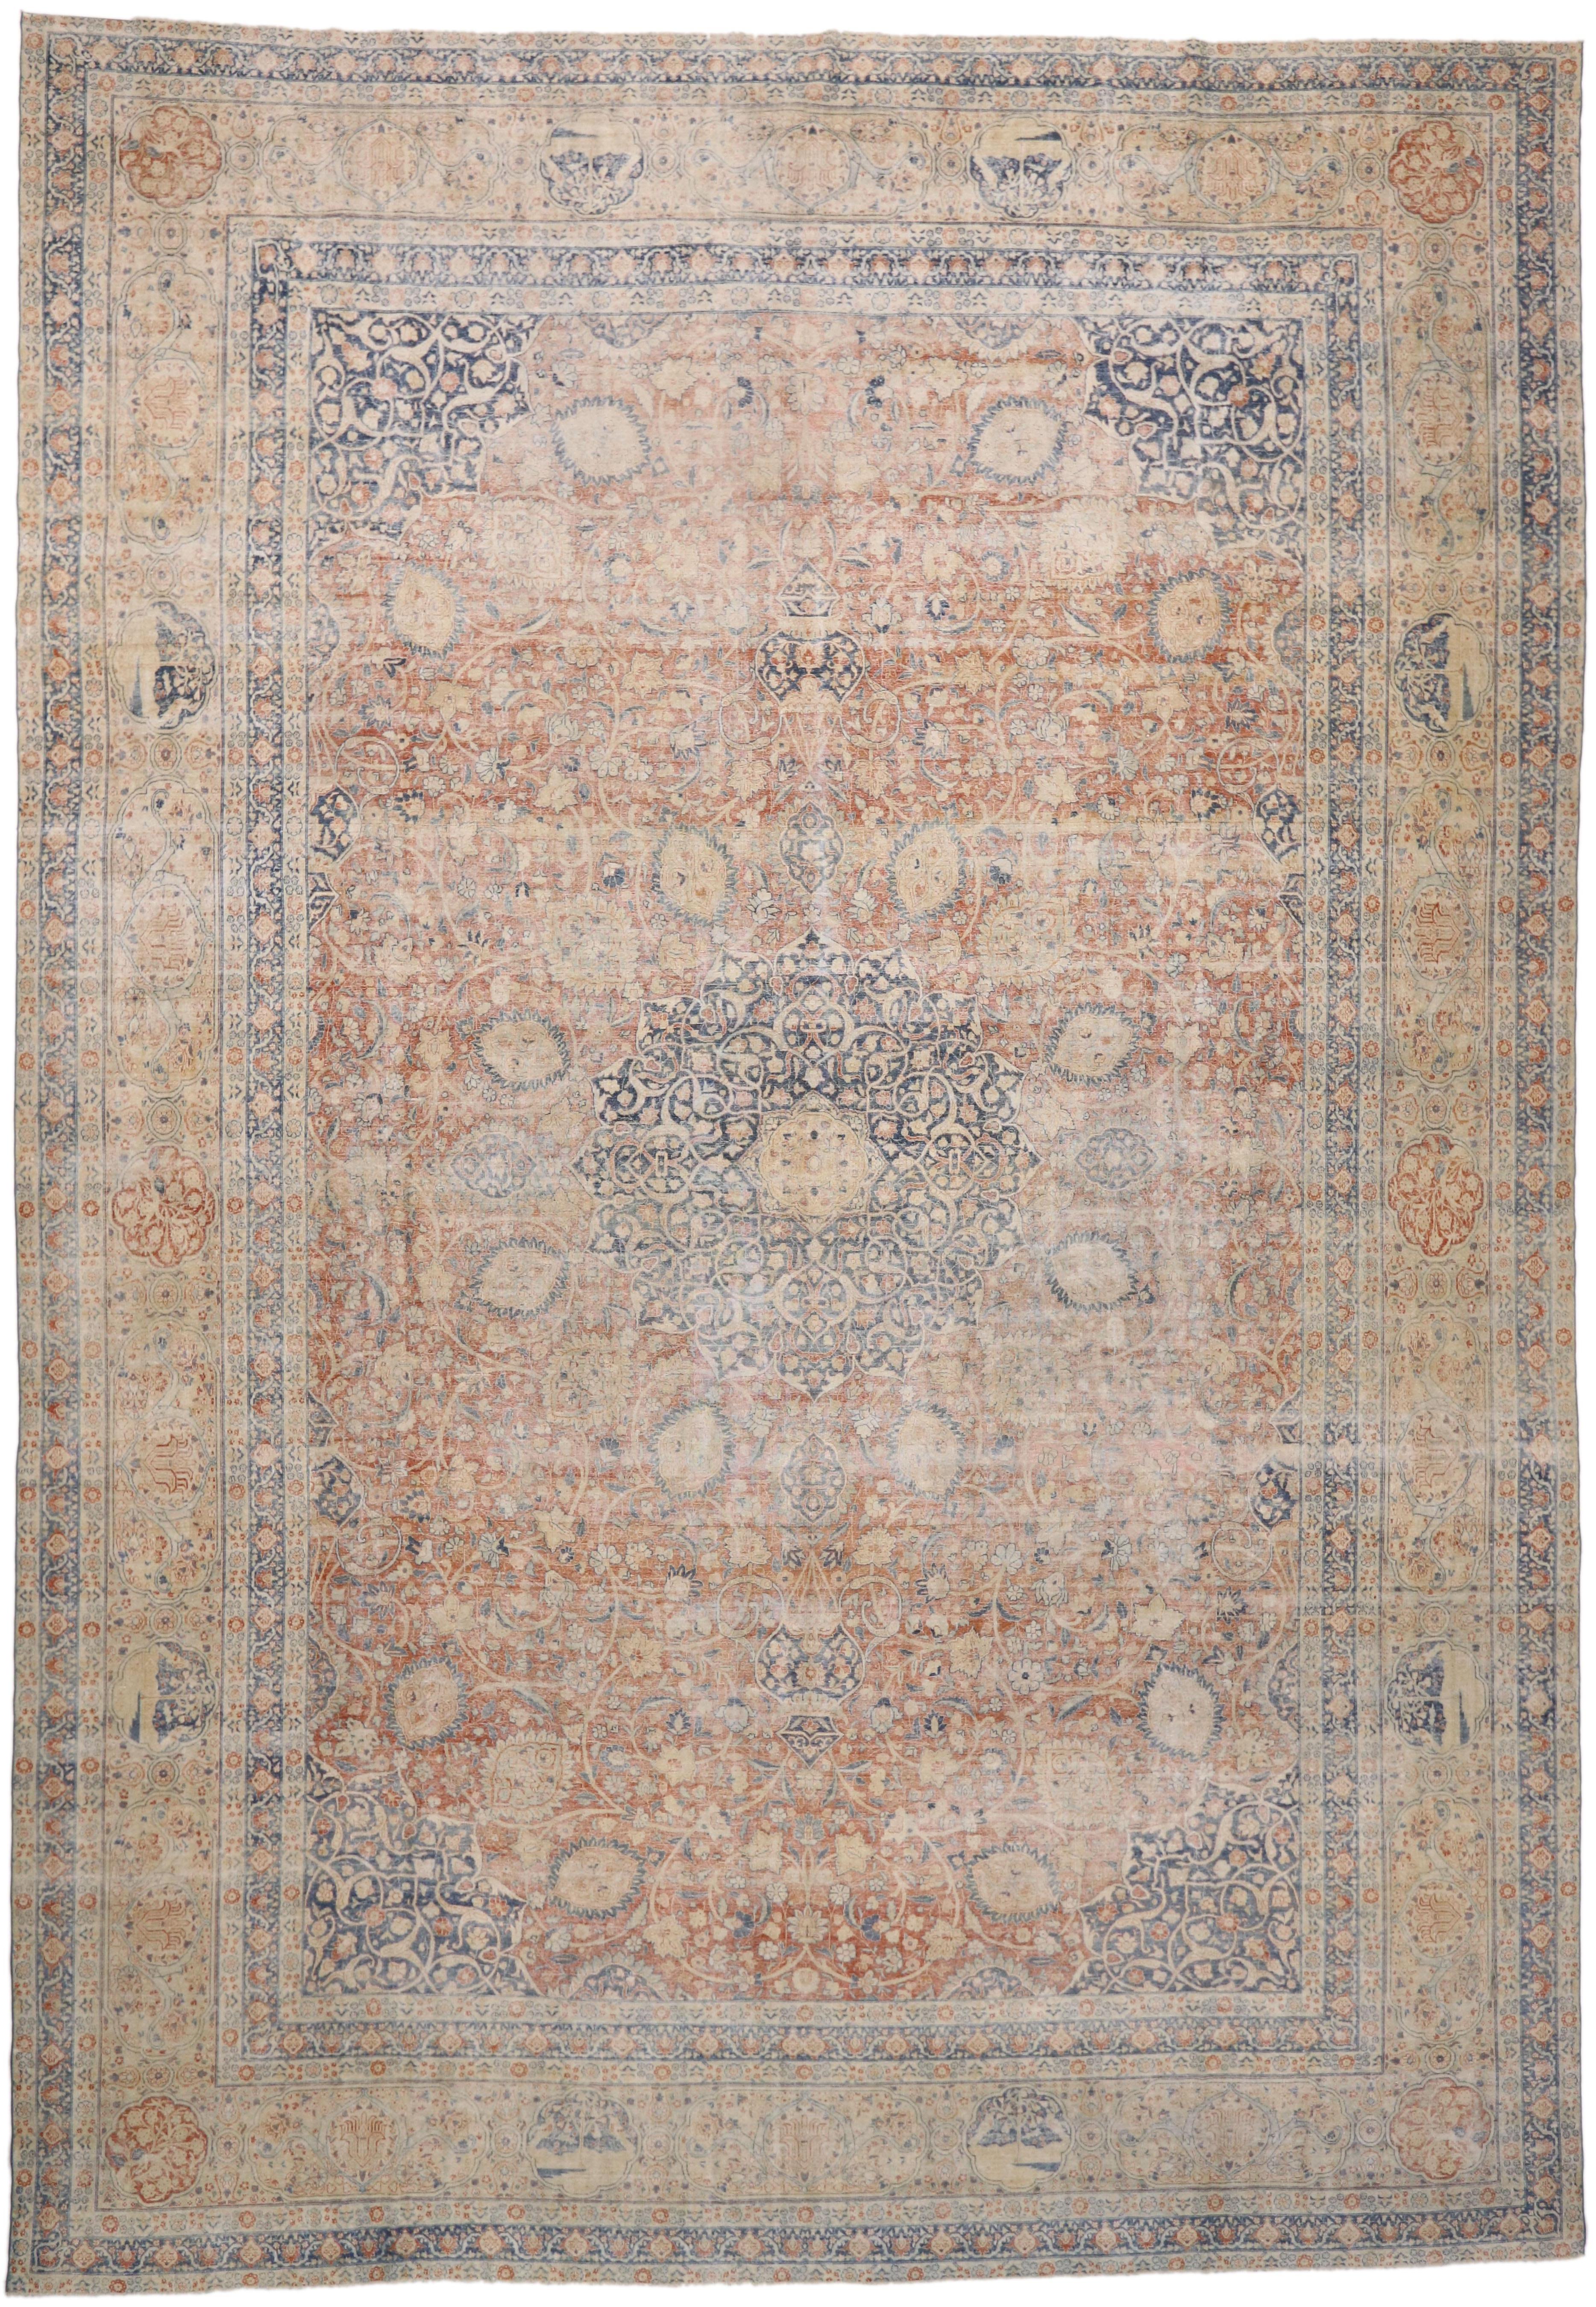 76692 Distressed Antique Persian Tabriz Palace Rug with Rustic Relaxed Federal Style and The Ardabil Carpet Design 15'00 x 21'08. Balancing a timeless floral design with traditional sensibility and a lovingly timeworn patina, this hand-knotted wool